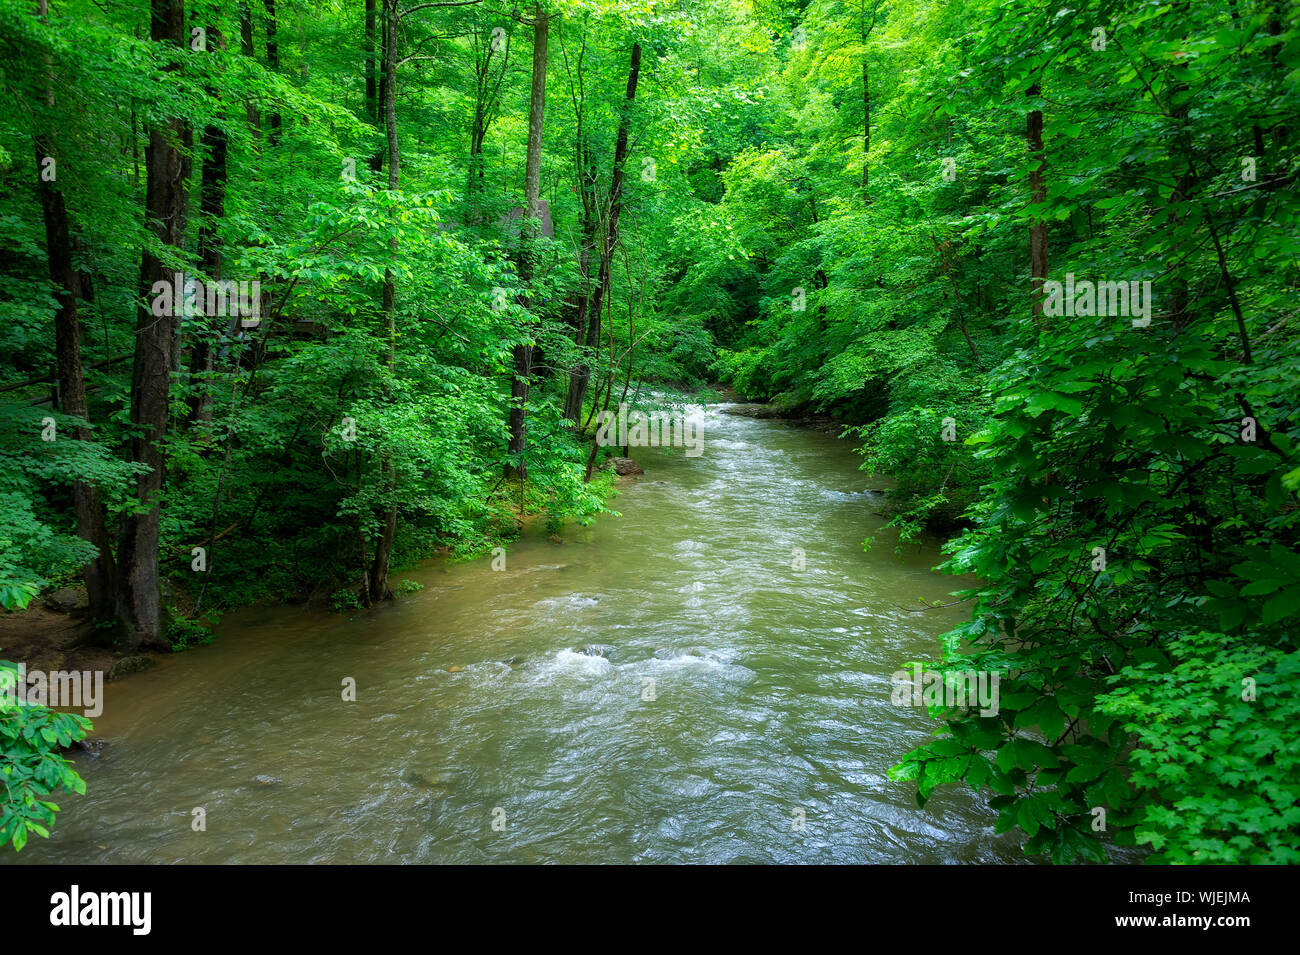 Clinch River flows through Virginia's Natural Tunnel State Park. Stock Photo